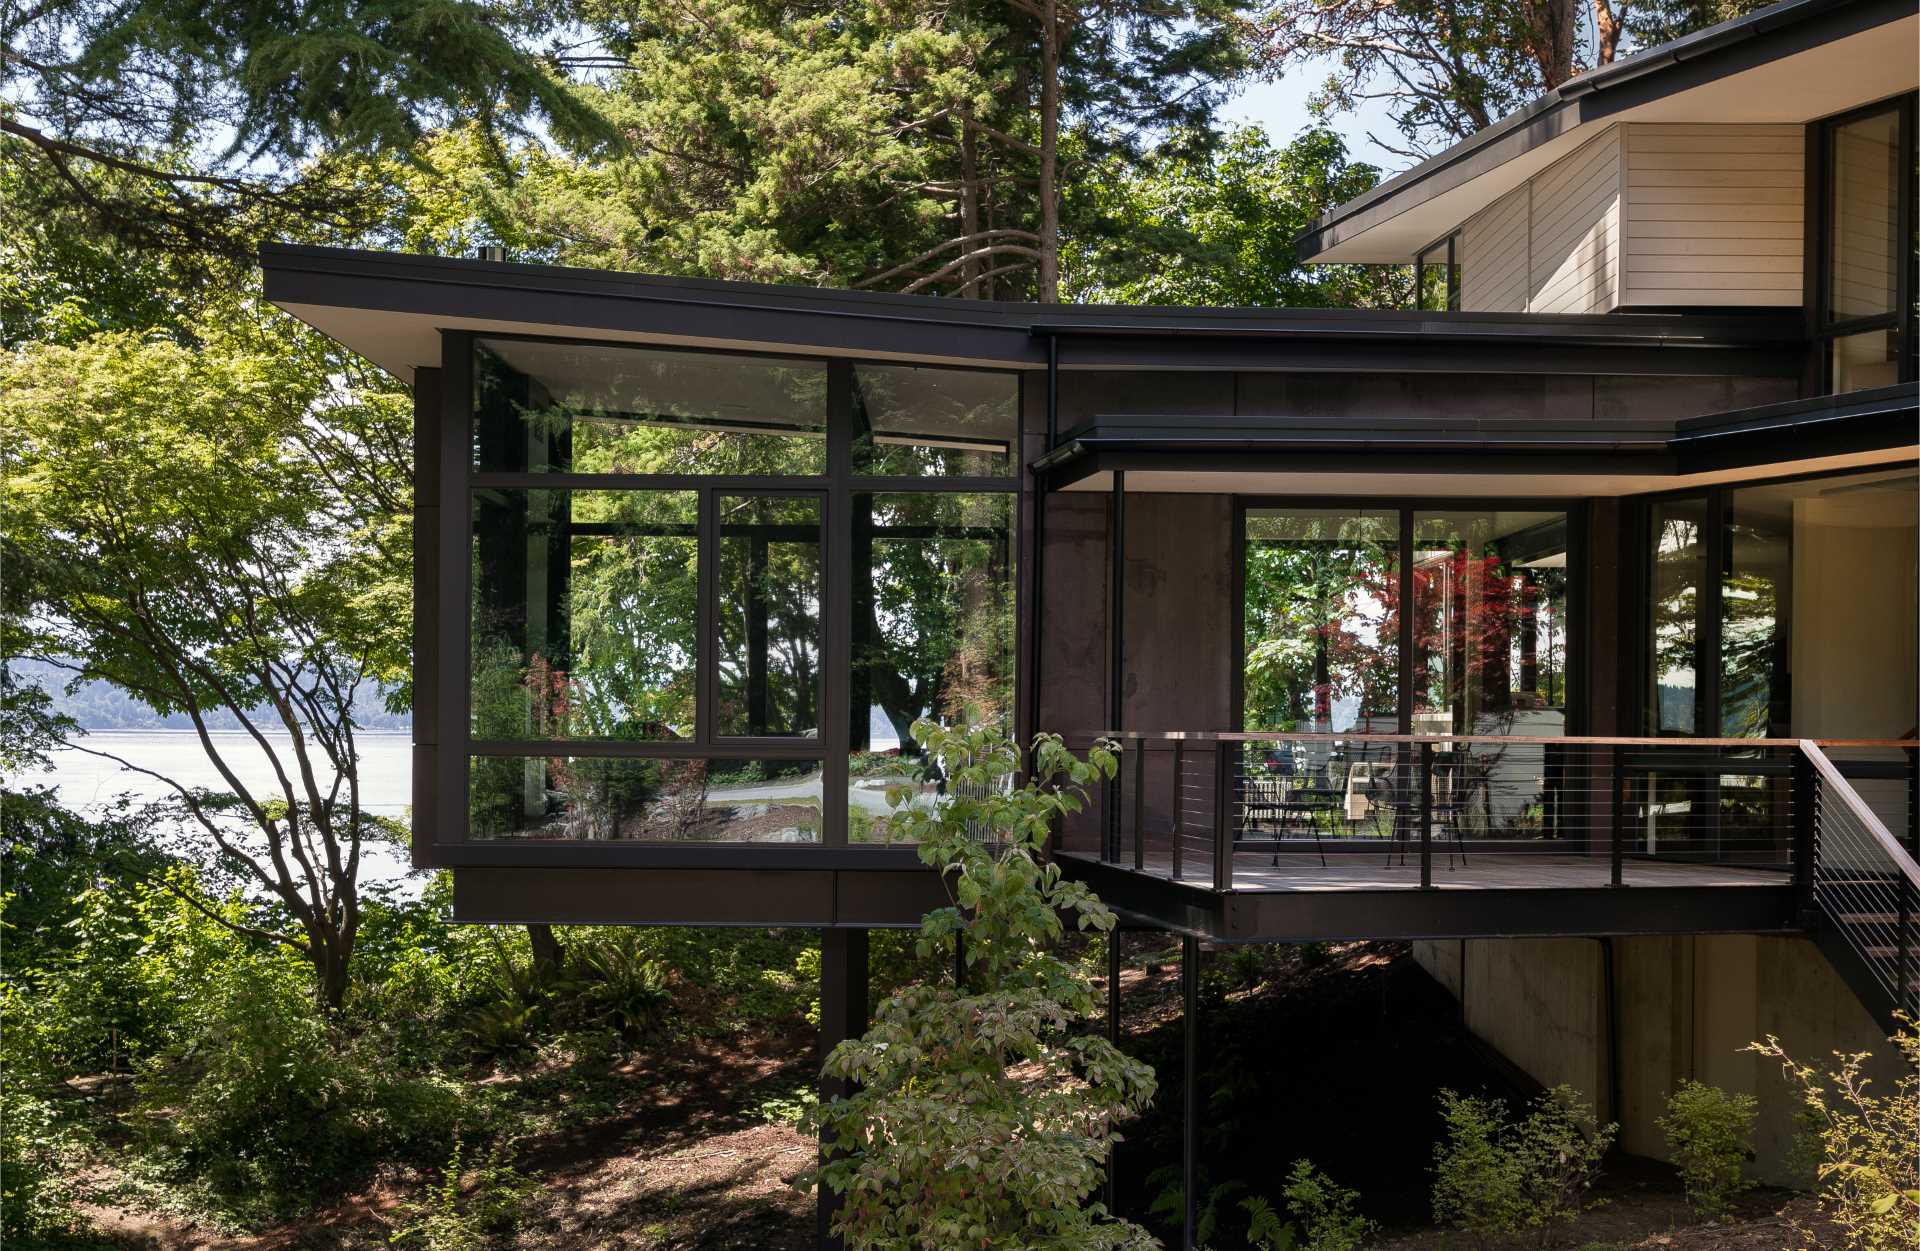 A modern home in the trees with a living room suspended above the forest floor.